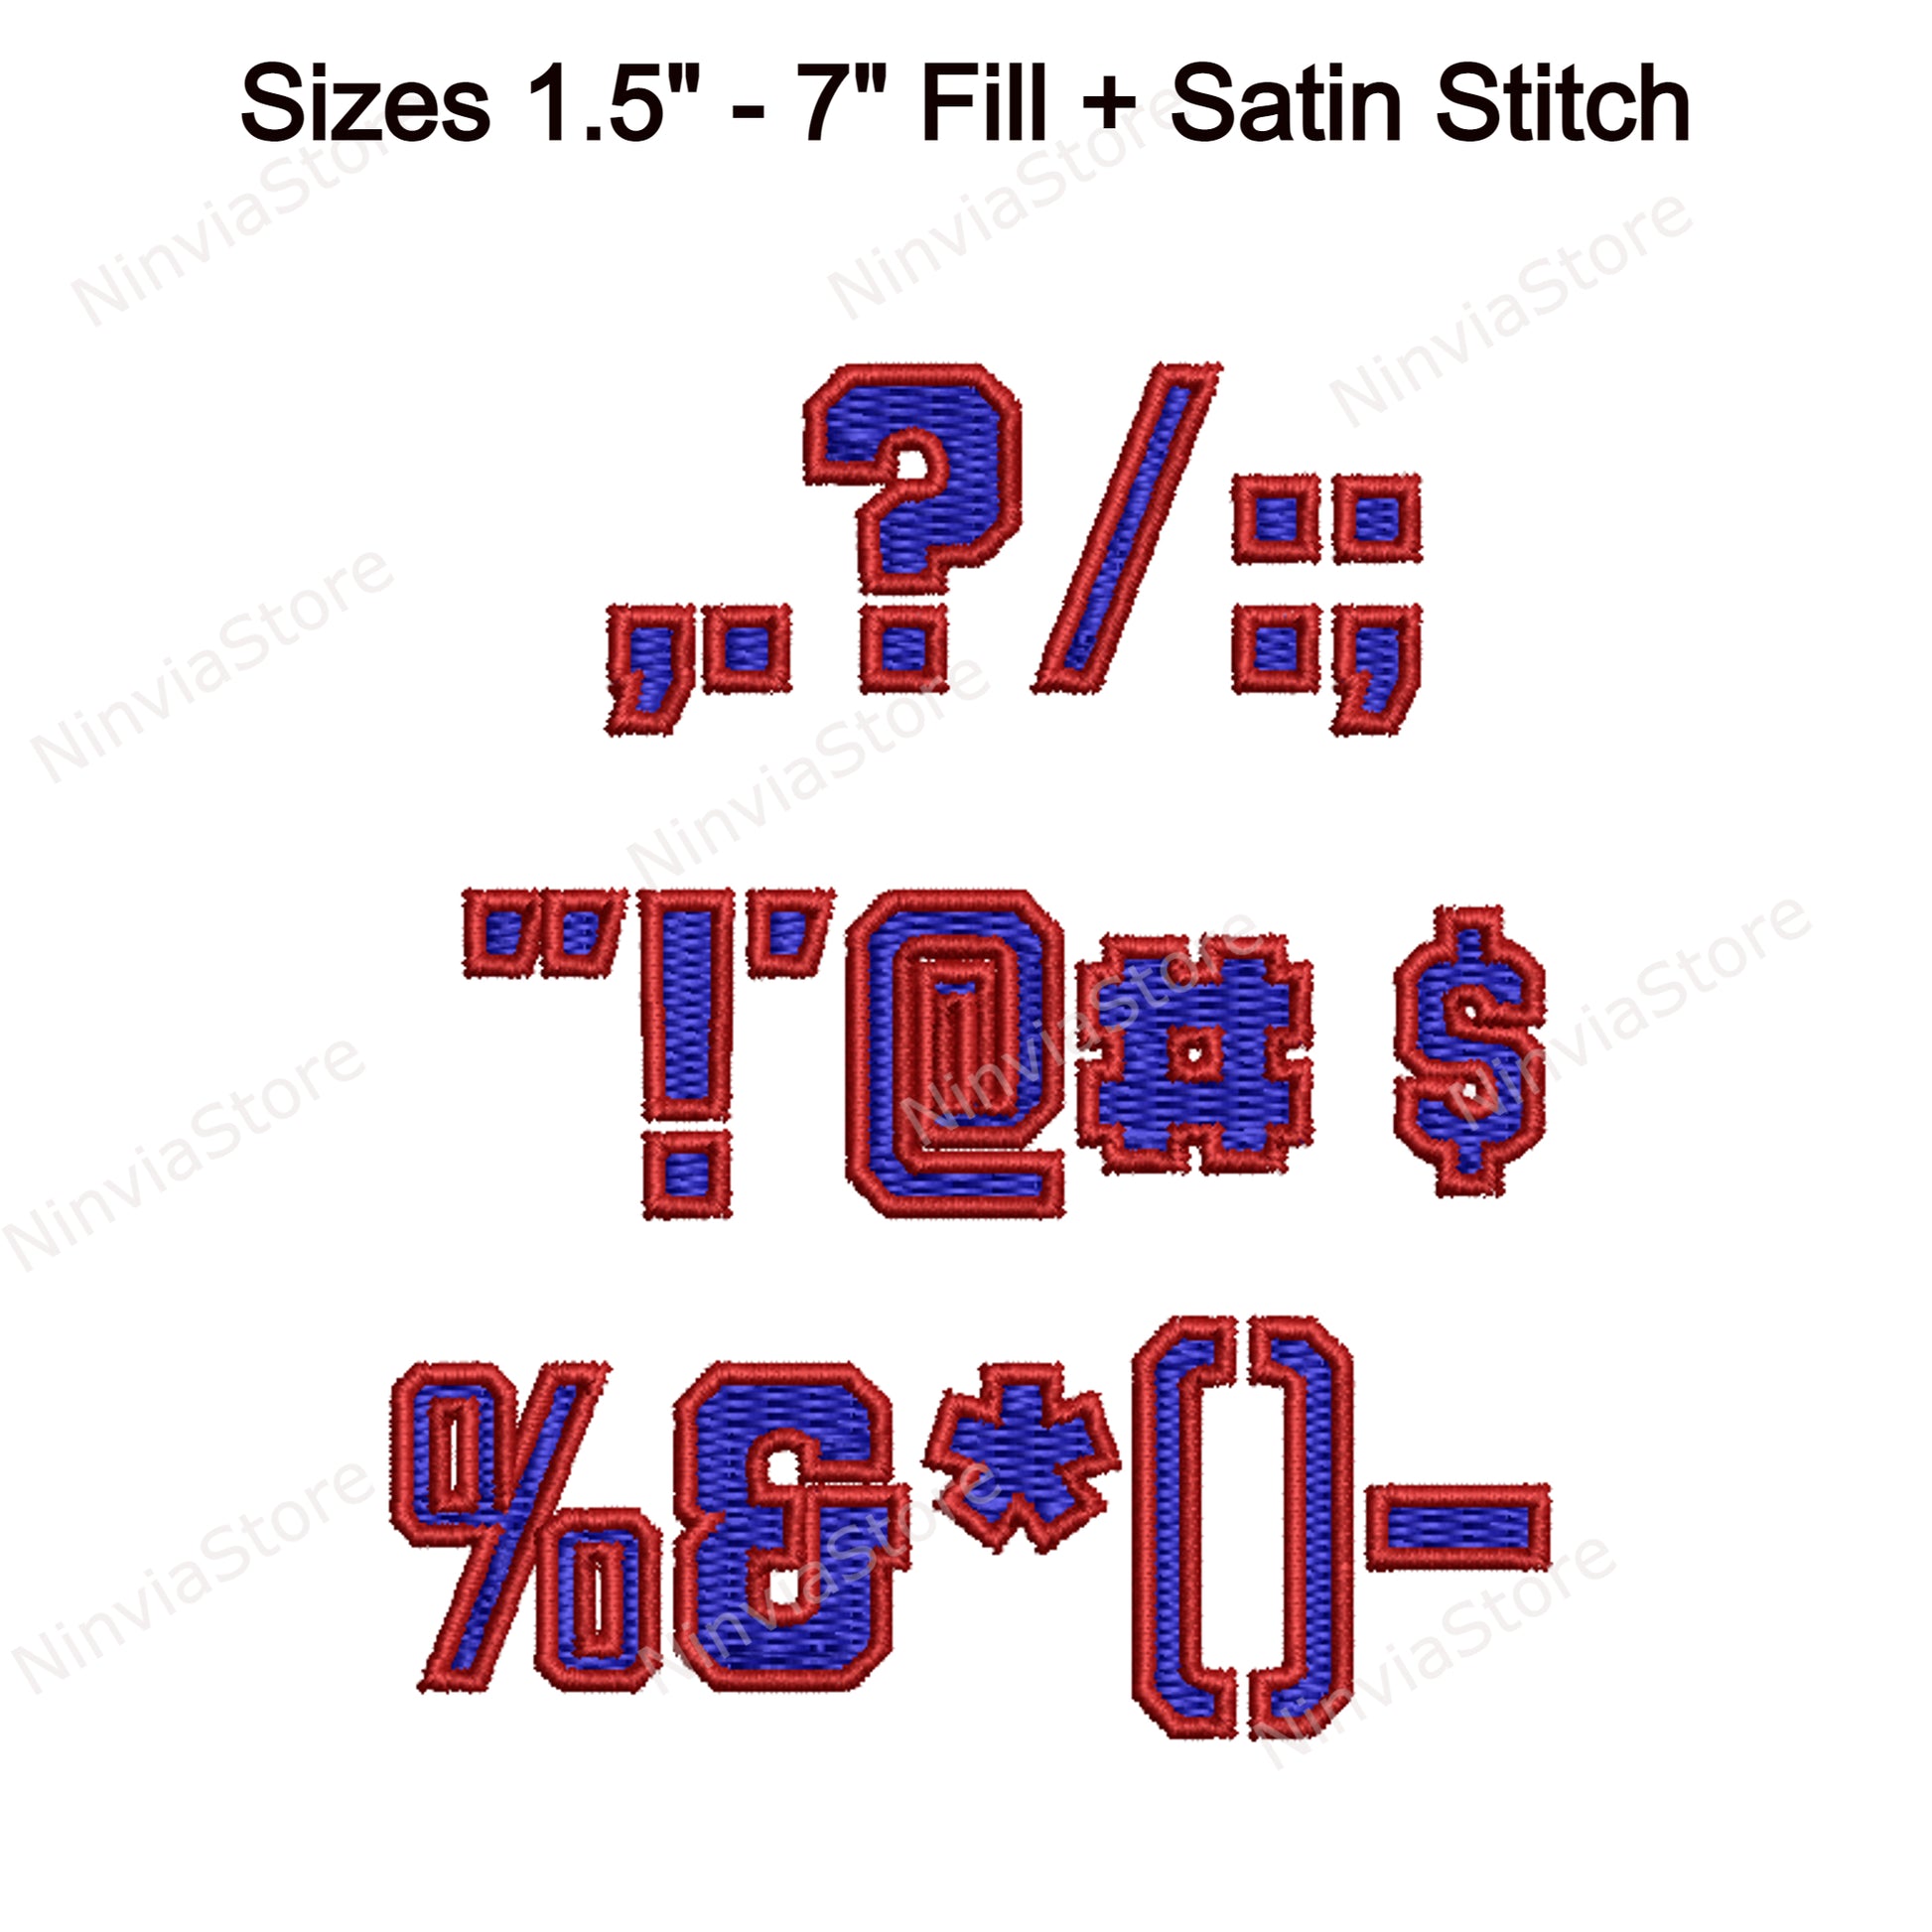 red sox numbers font